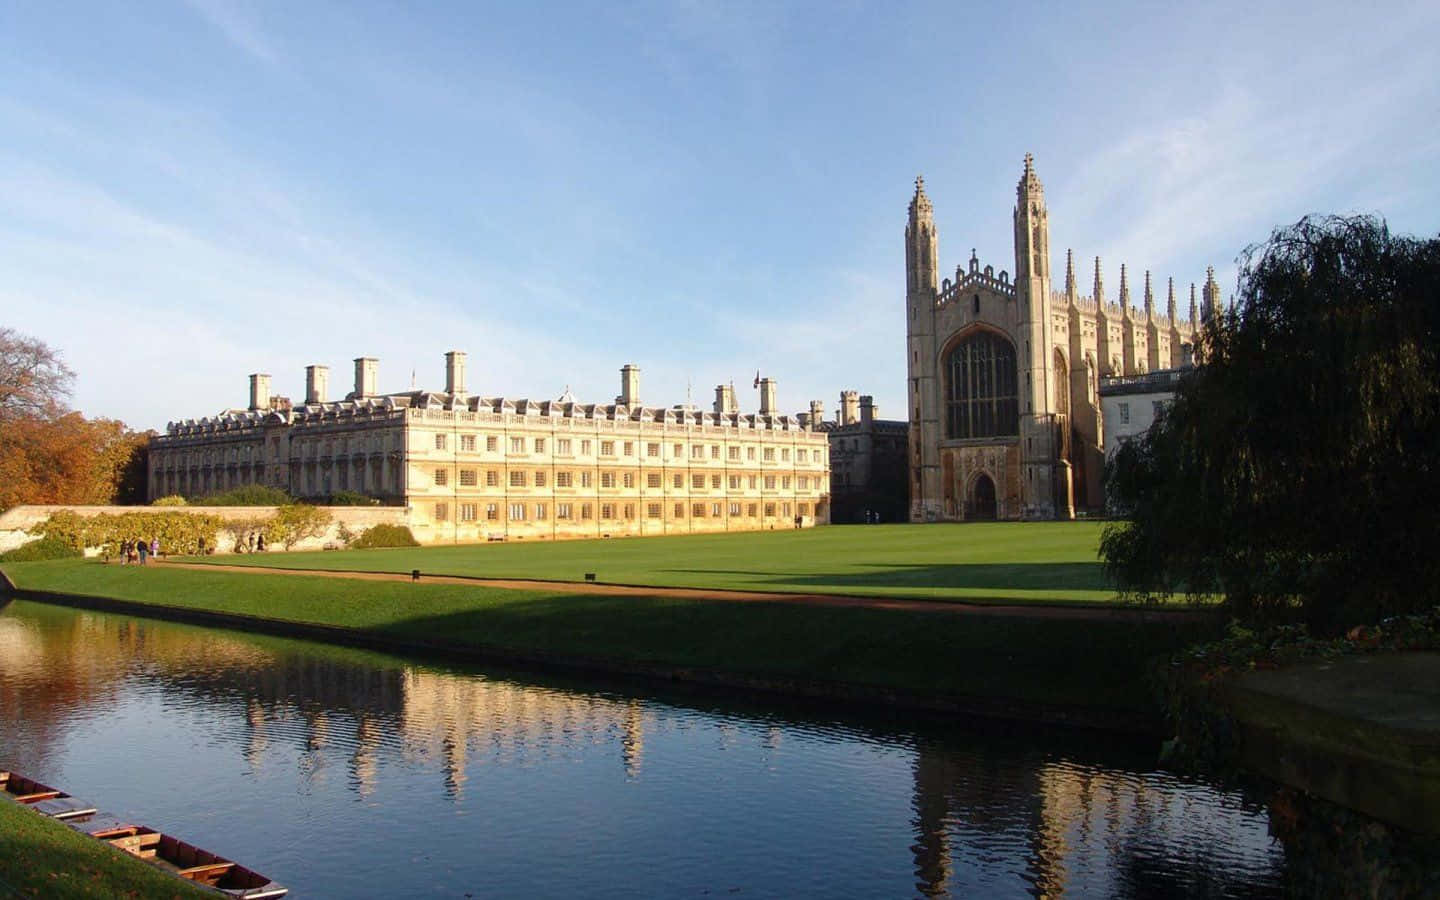 "A Majestic View of Cambridge University Reflecting off the Lake" Wallpaper